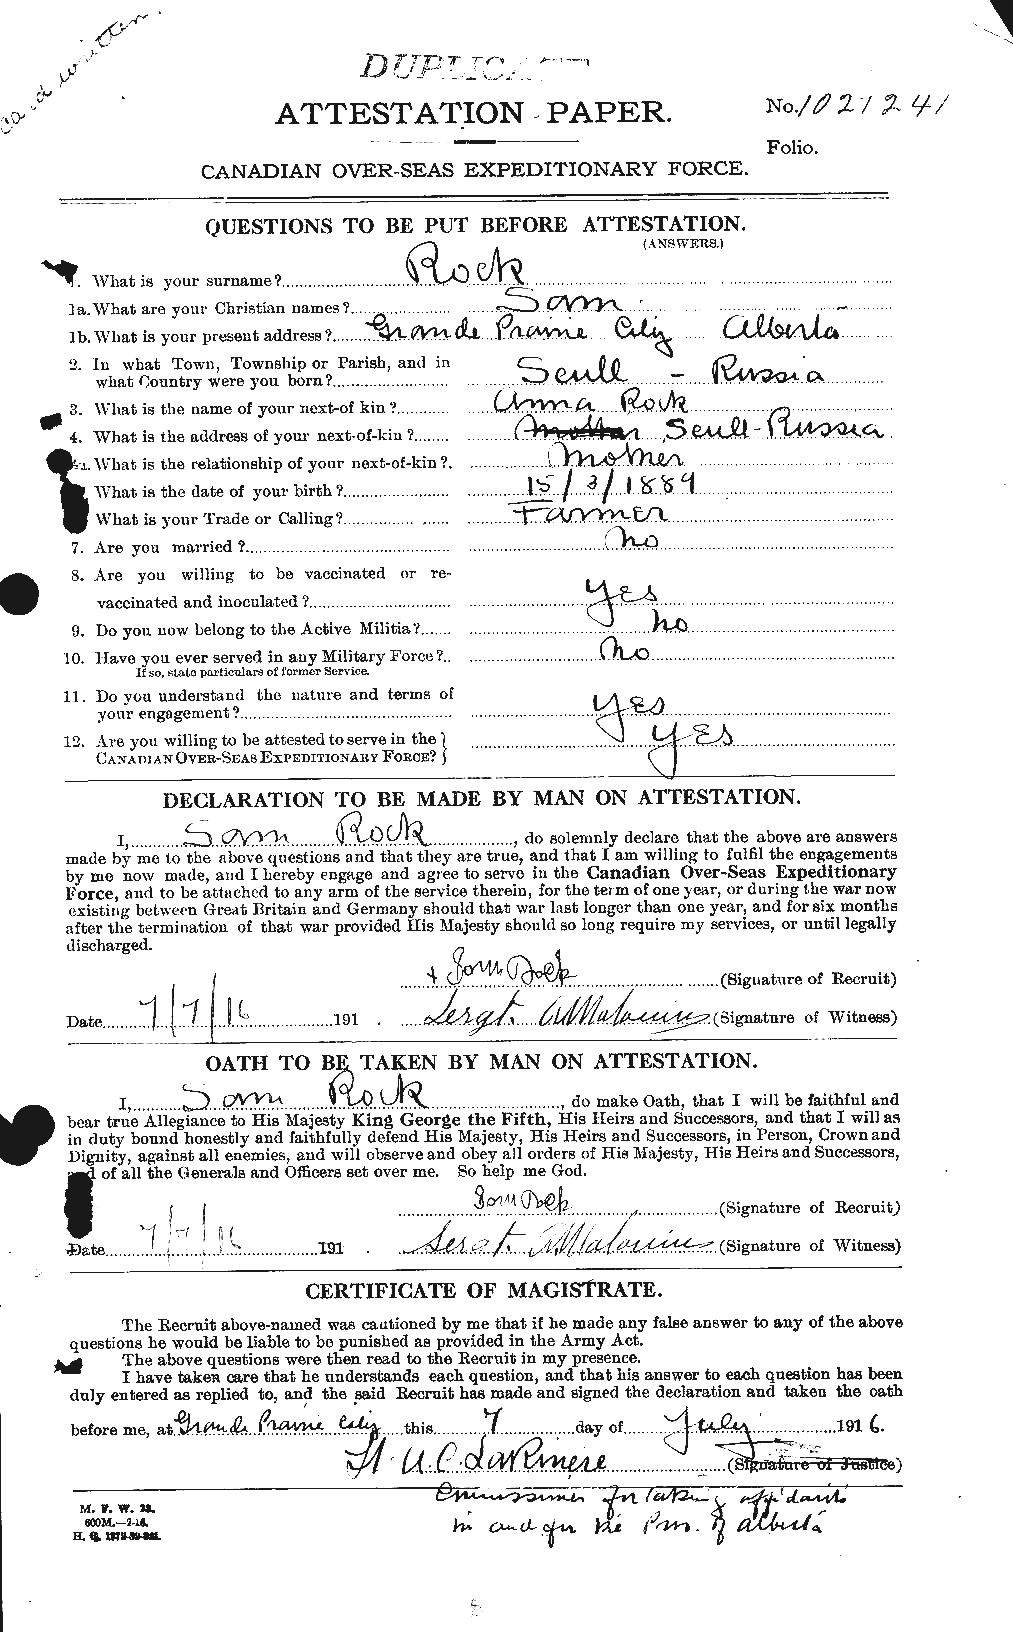 Personnel Records of the First World War - CEF 609128a